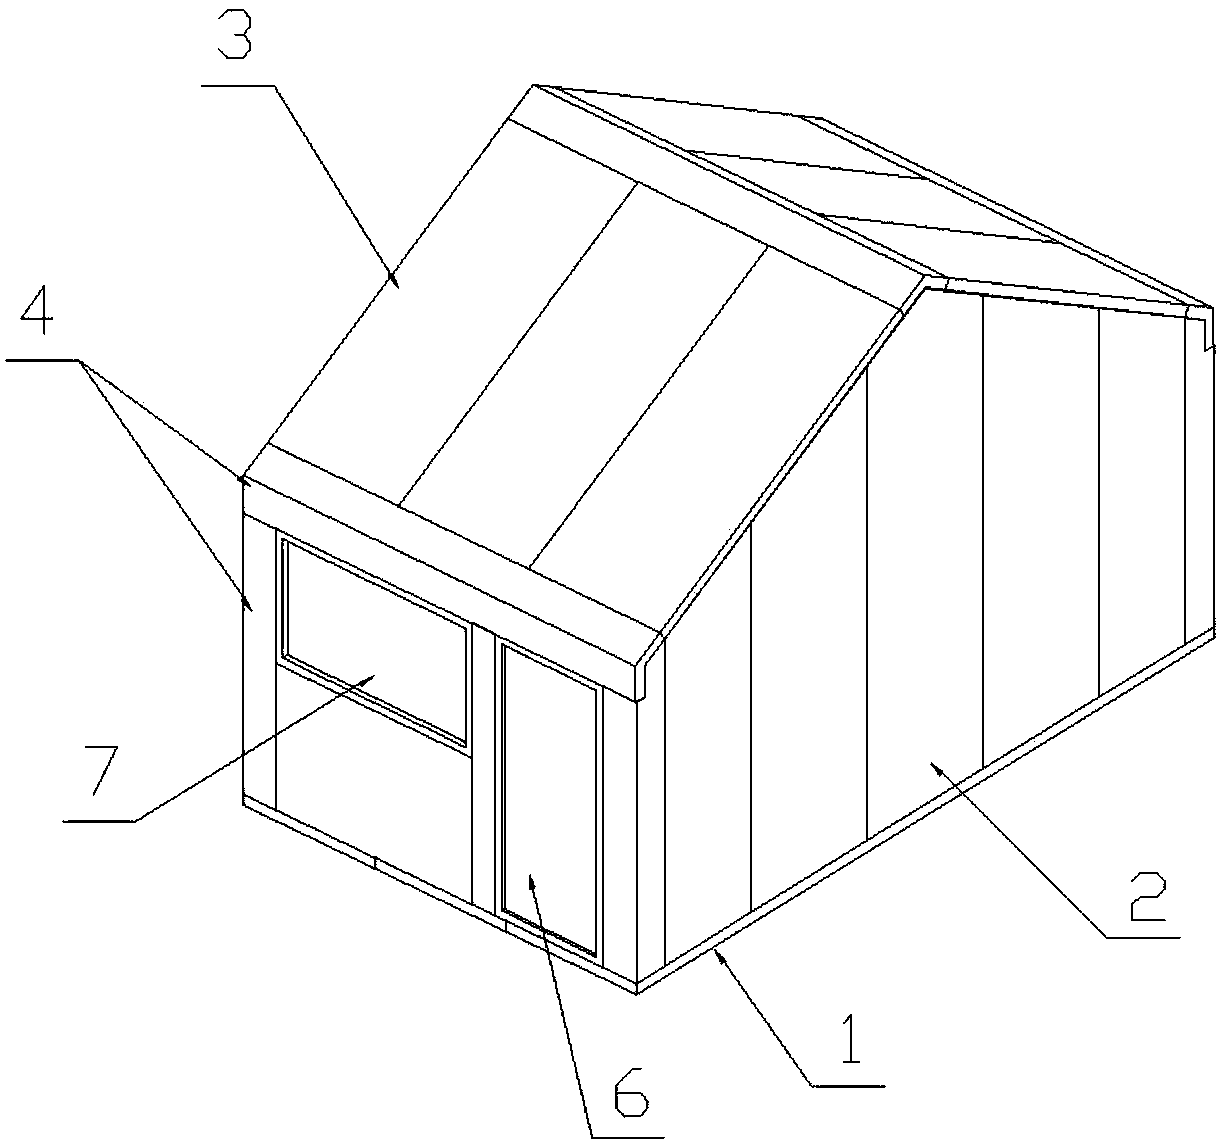 Fabricated house capable of being quickly assembled and disassembled